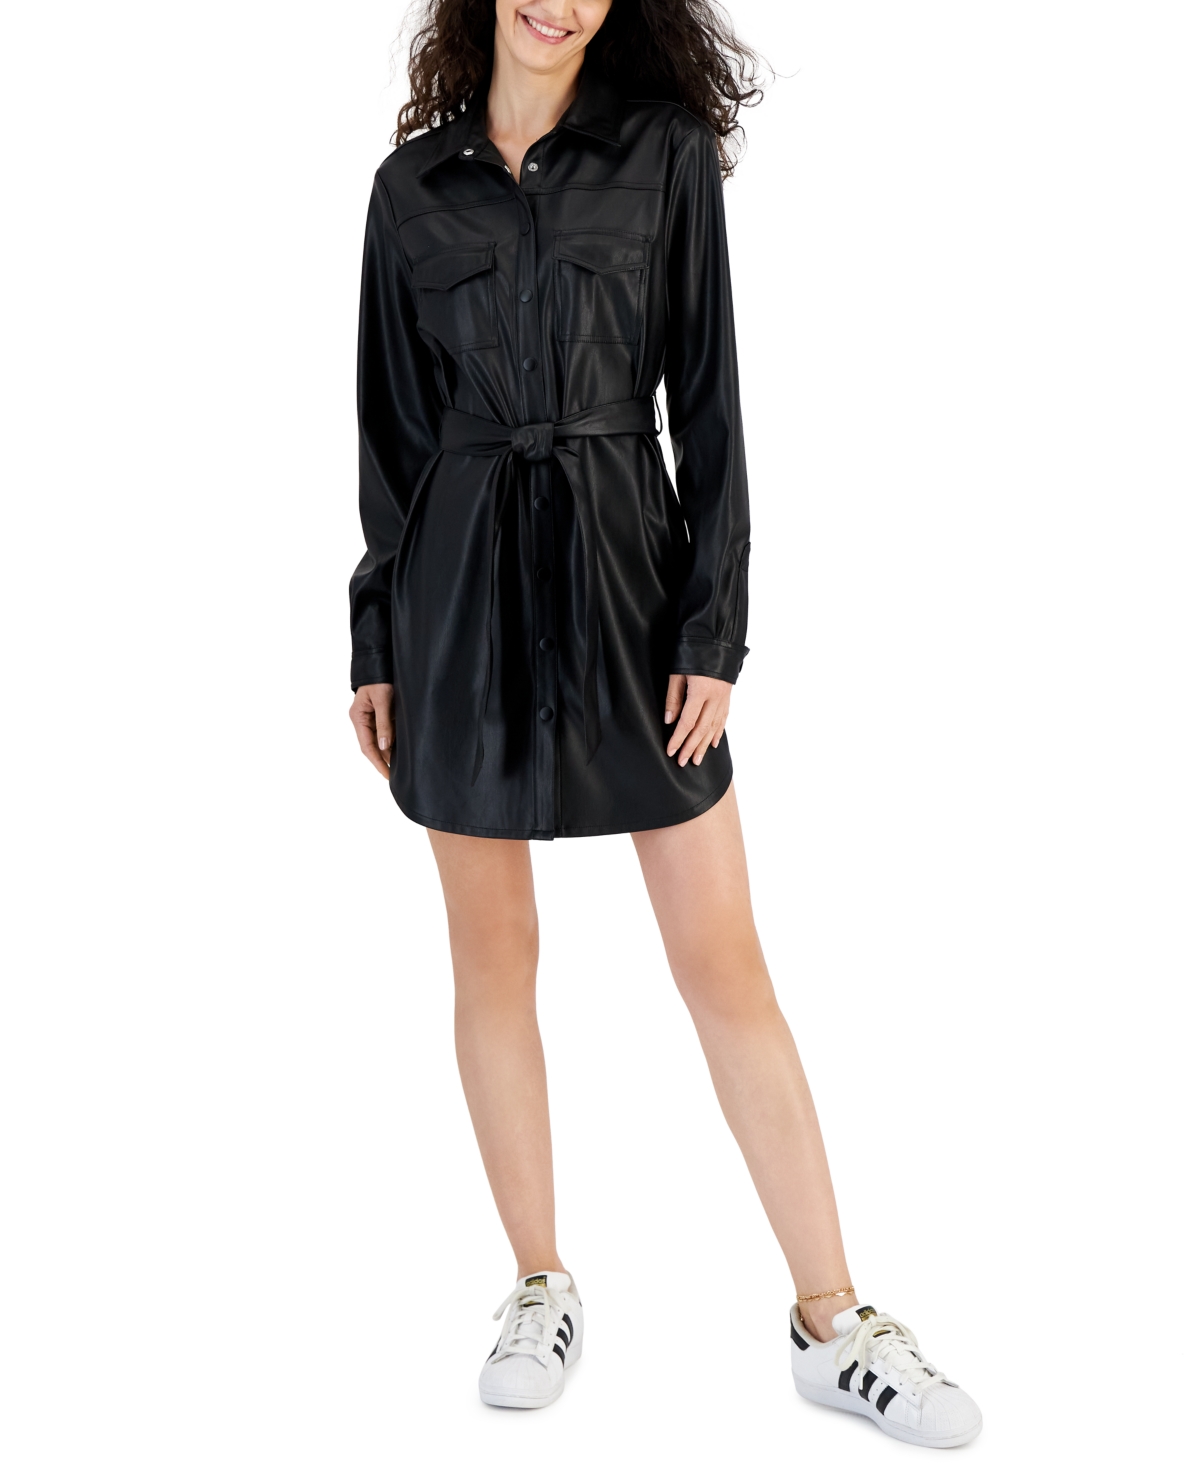 Juniors' Faux-Leather Belted Shirtdress - Black